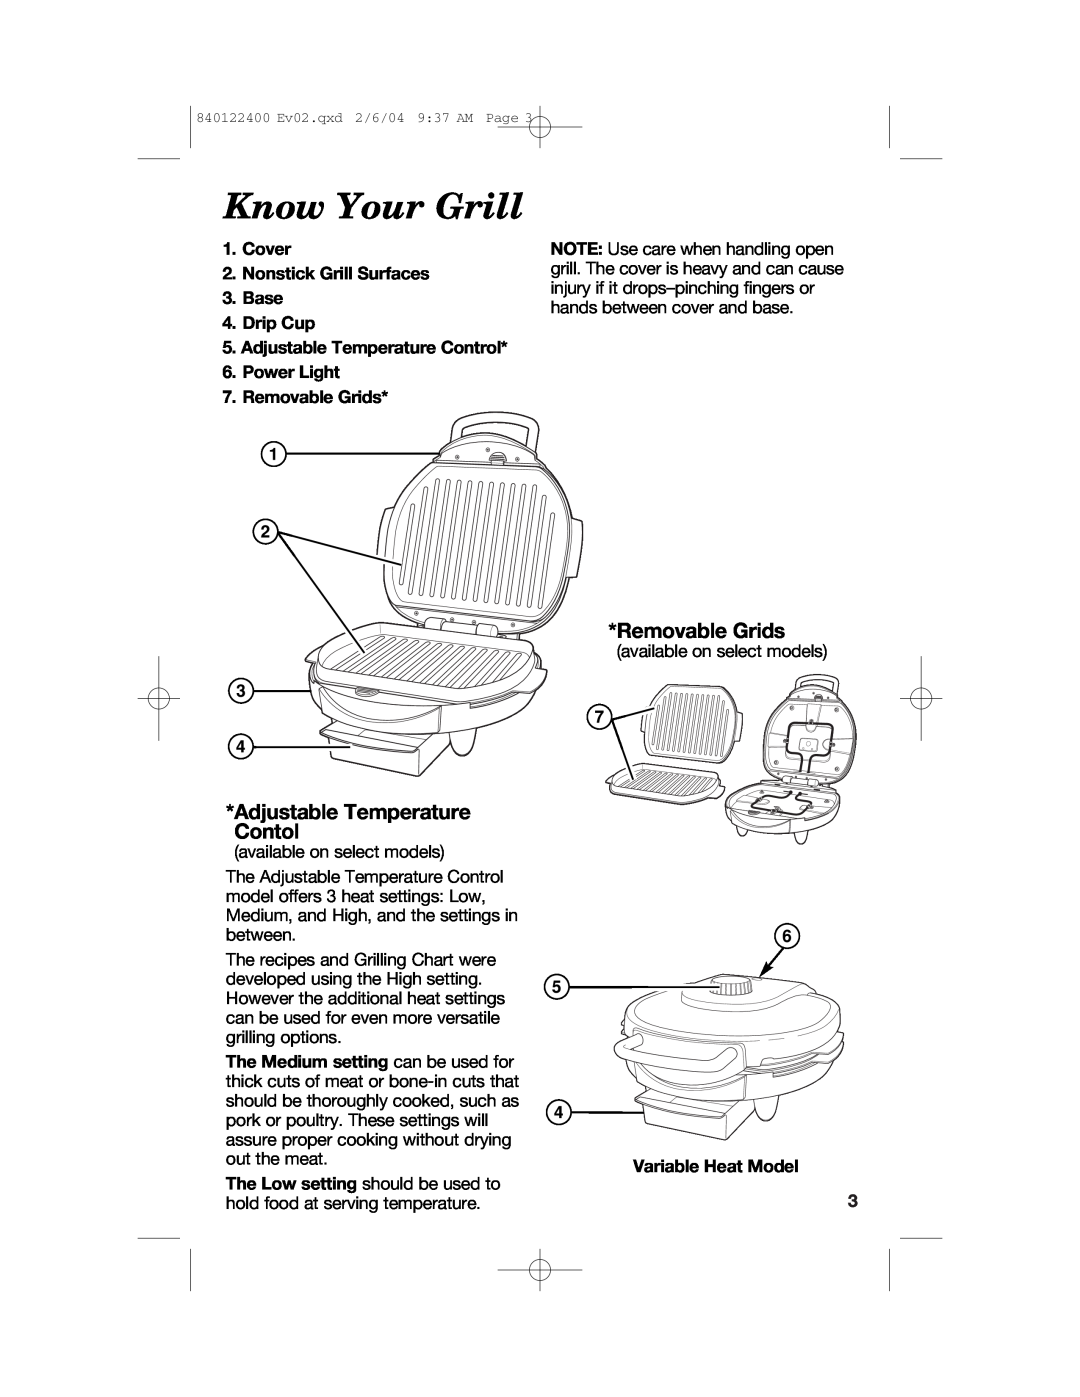 Hamilton Beach 25326C manual Know Your Grill, Adjustable Temperature Contol, Power Light 7.Removable Grids 